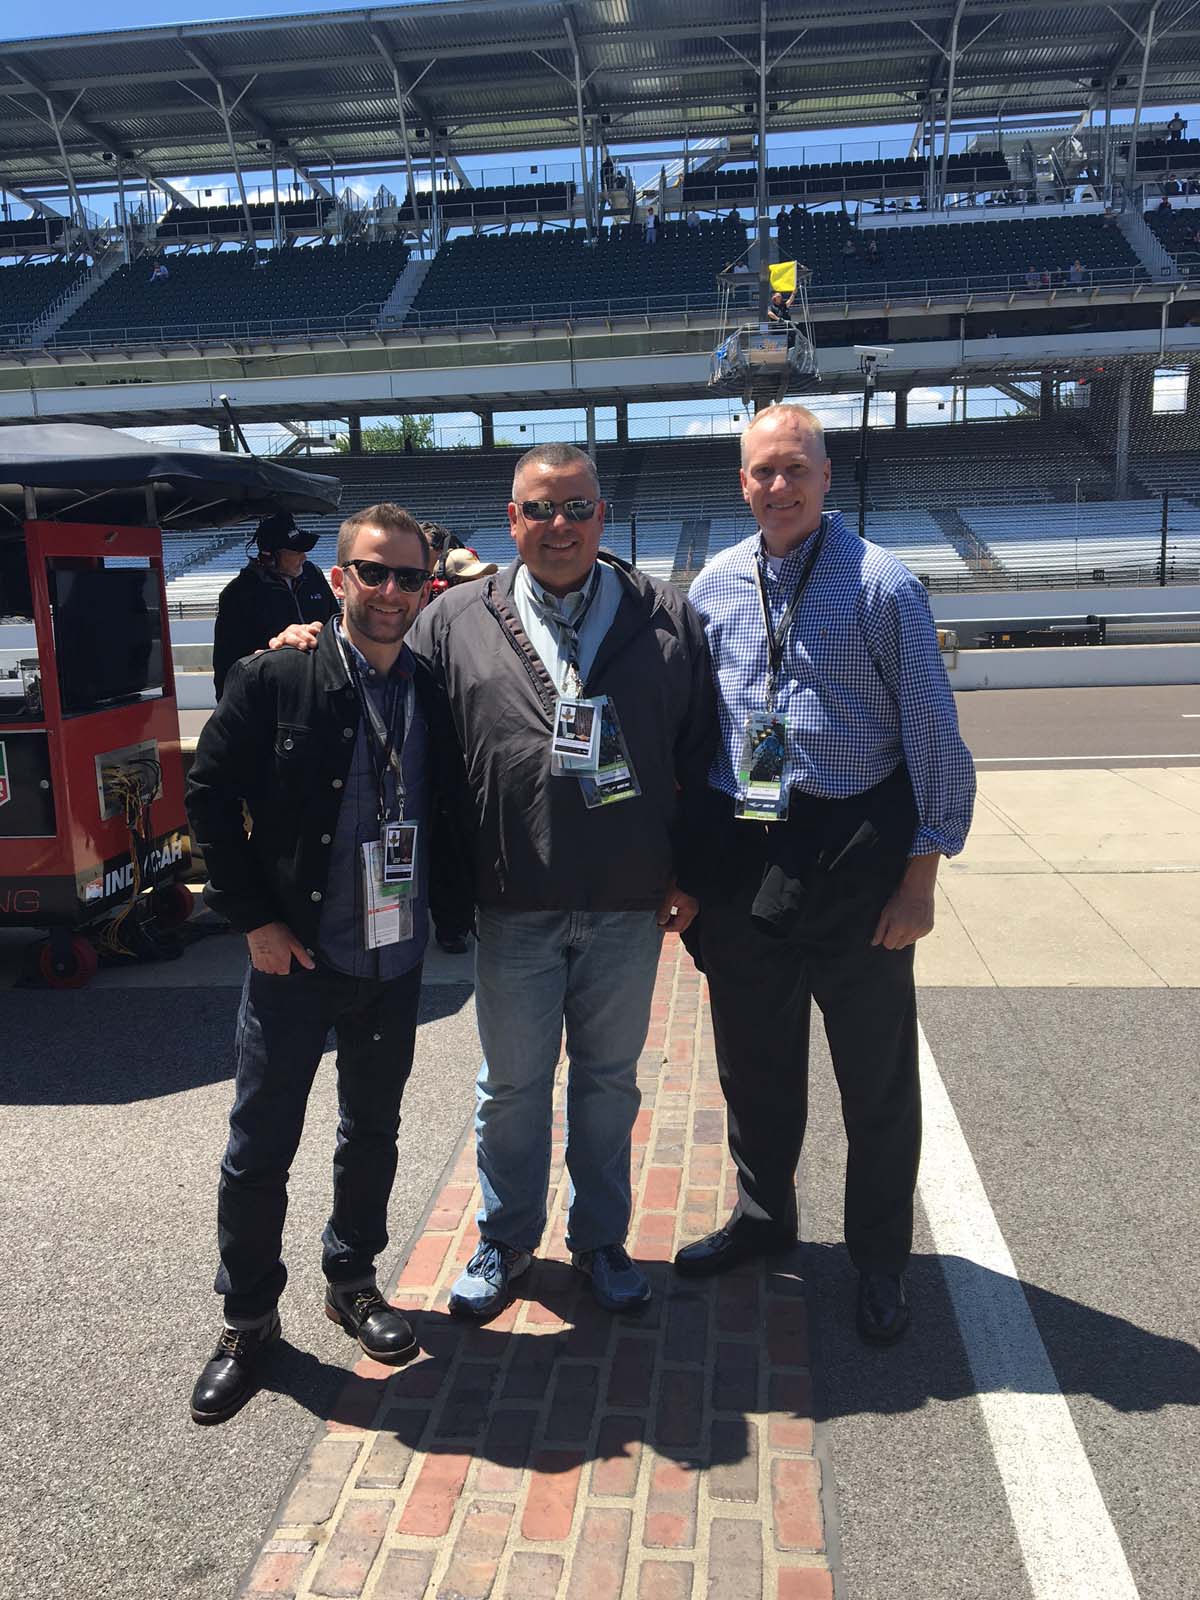 standing on the famous bricks at indy motor speedway